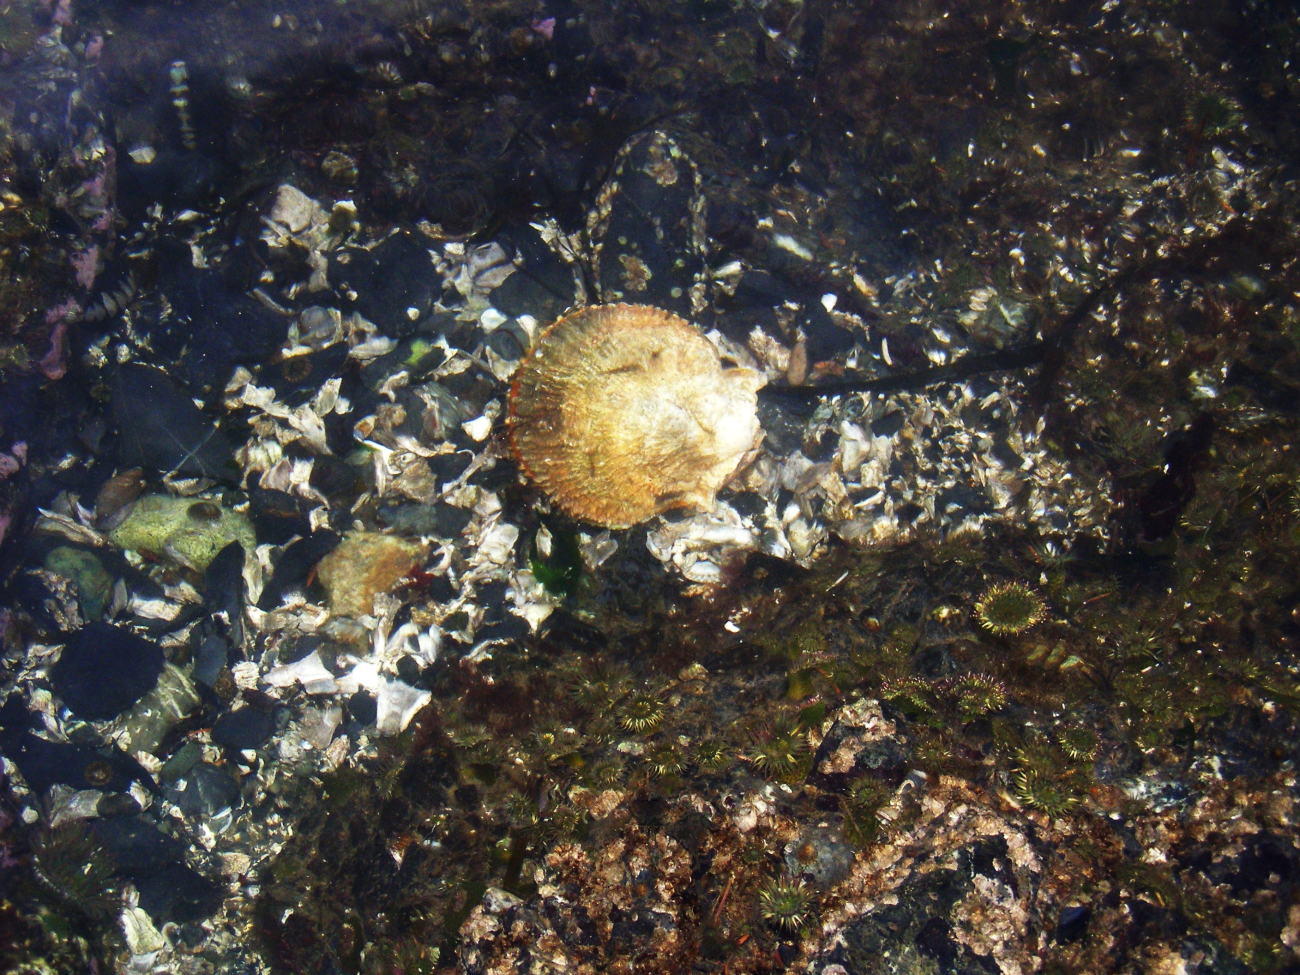 A scallop shell, two chitons in the upper left, small anemones in the lowerright, a few barnacles, and shell and rock debris in an Aleutian tidepool